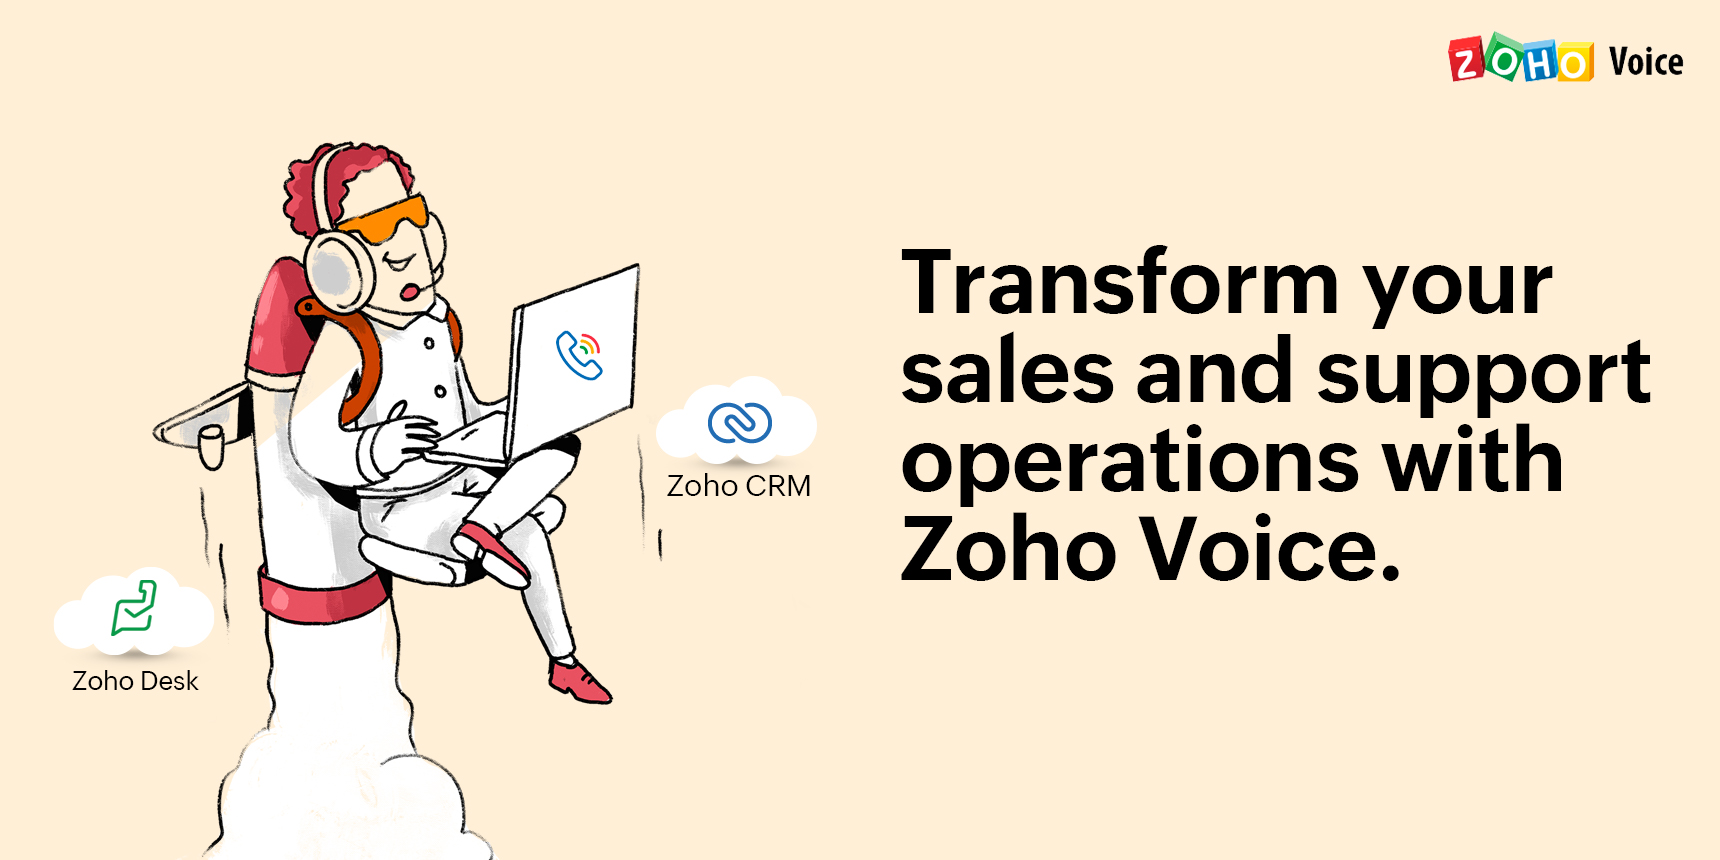 Zoho Voice places a phone booth inside Zoho CRM and Desk